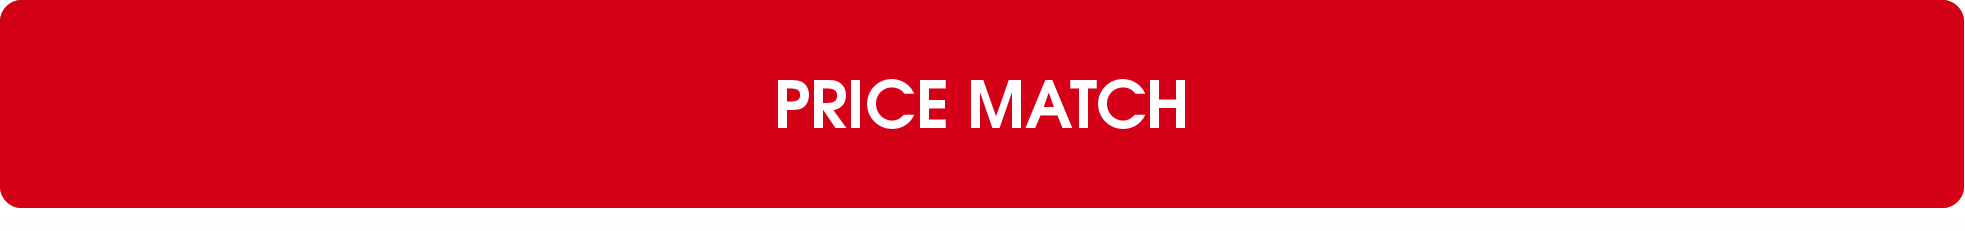 Price Match - North Face Custom Bags